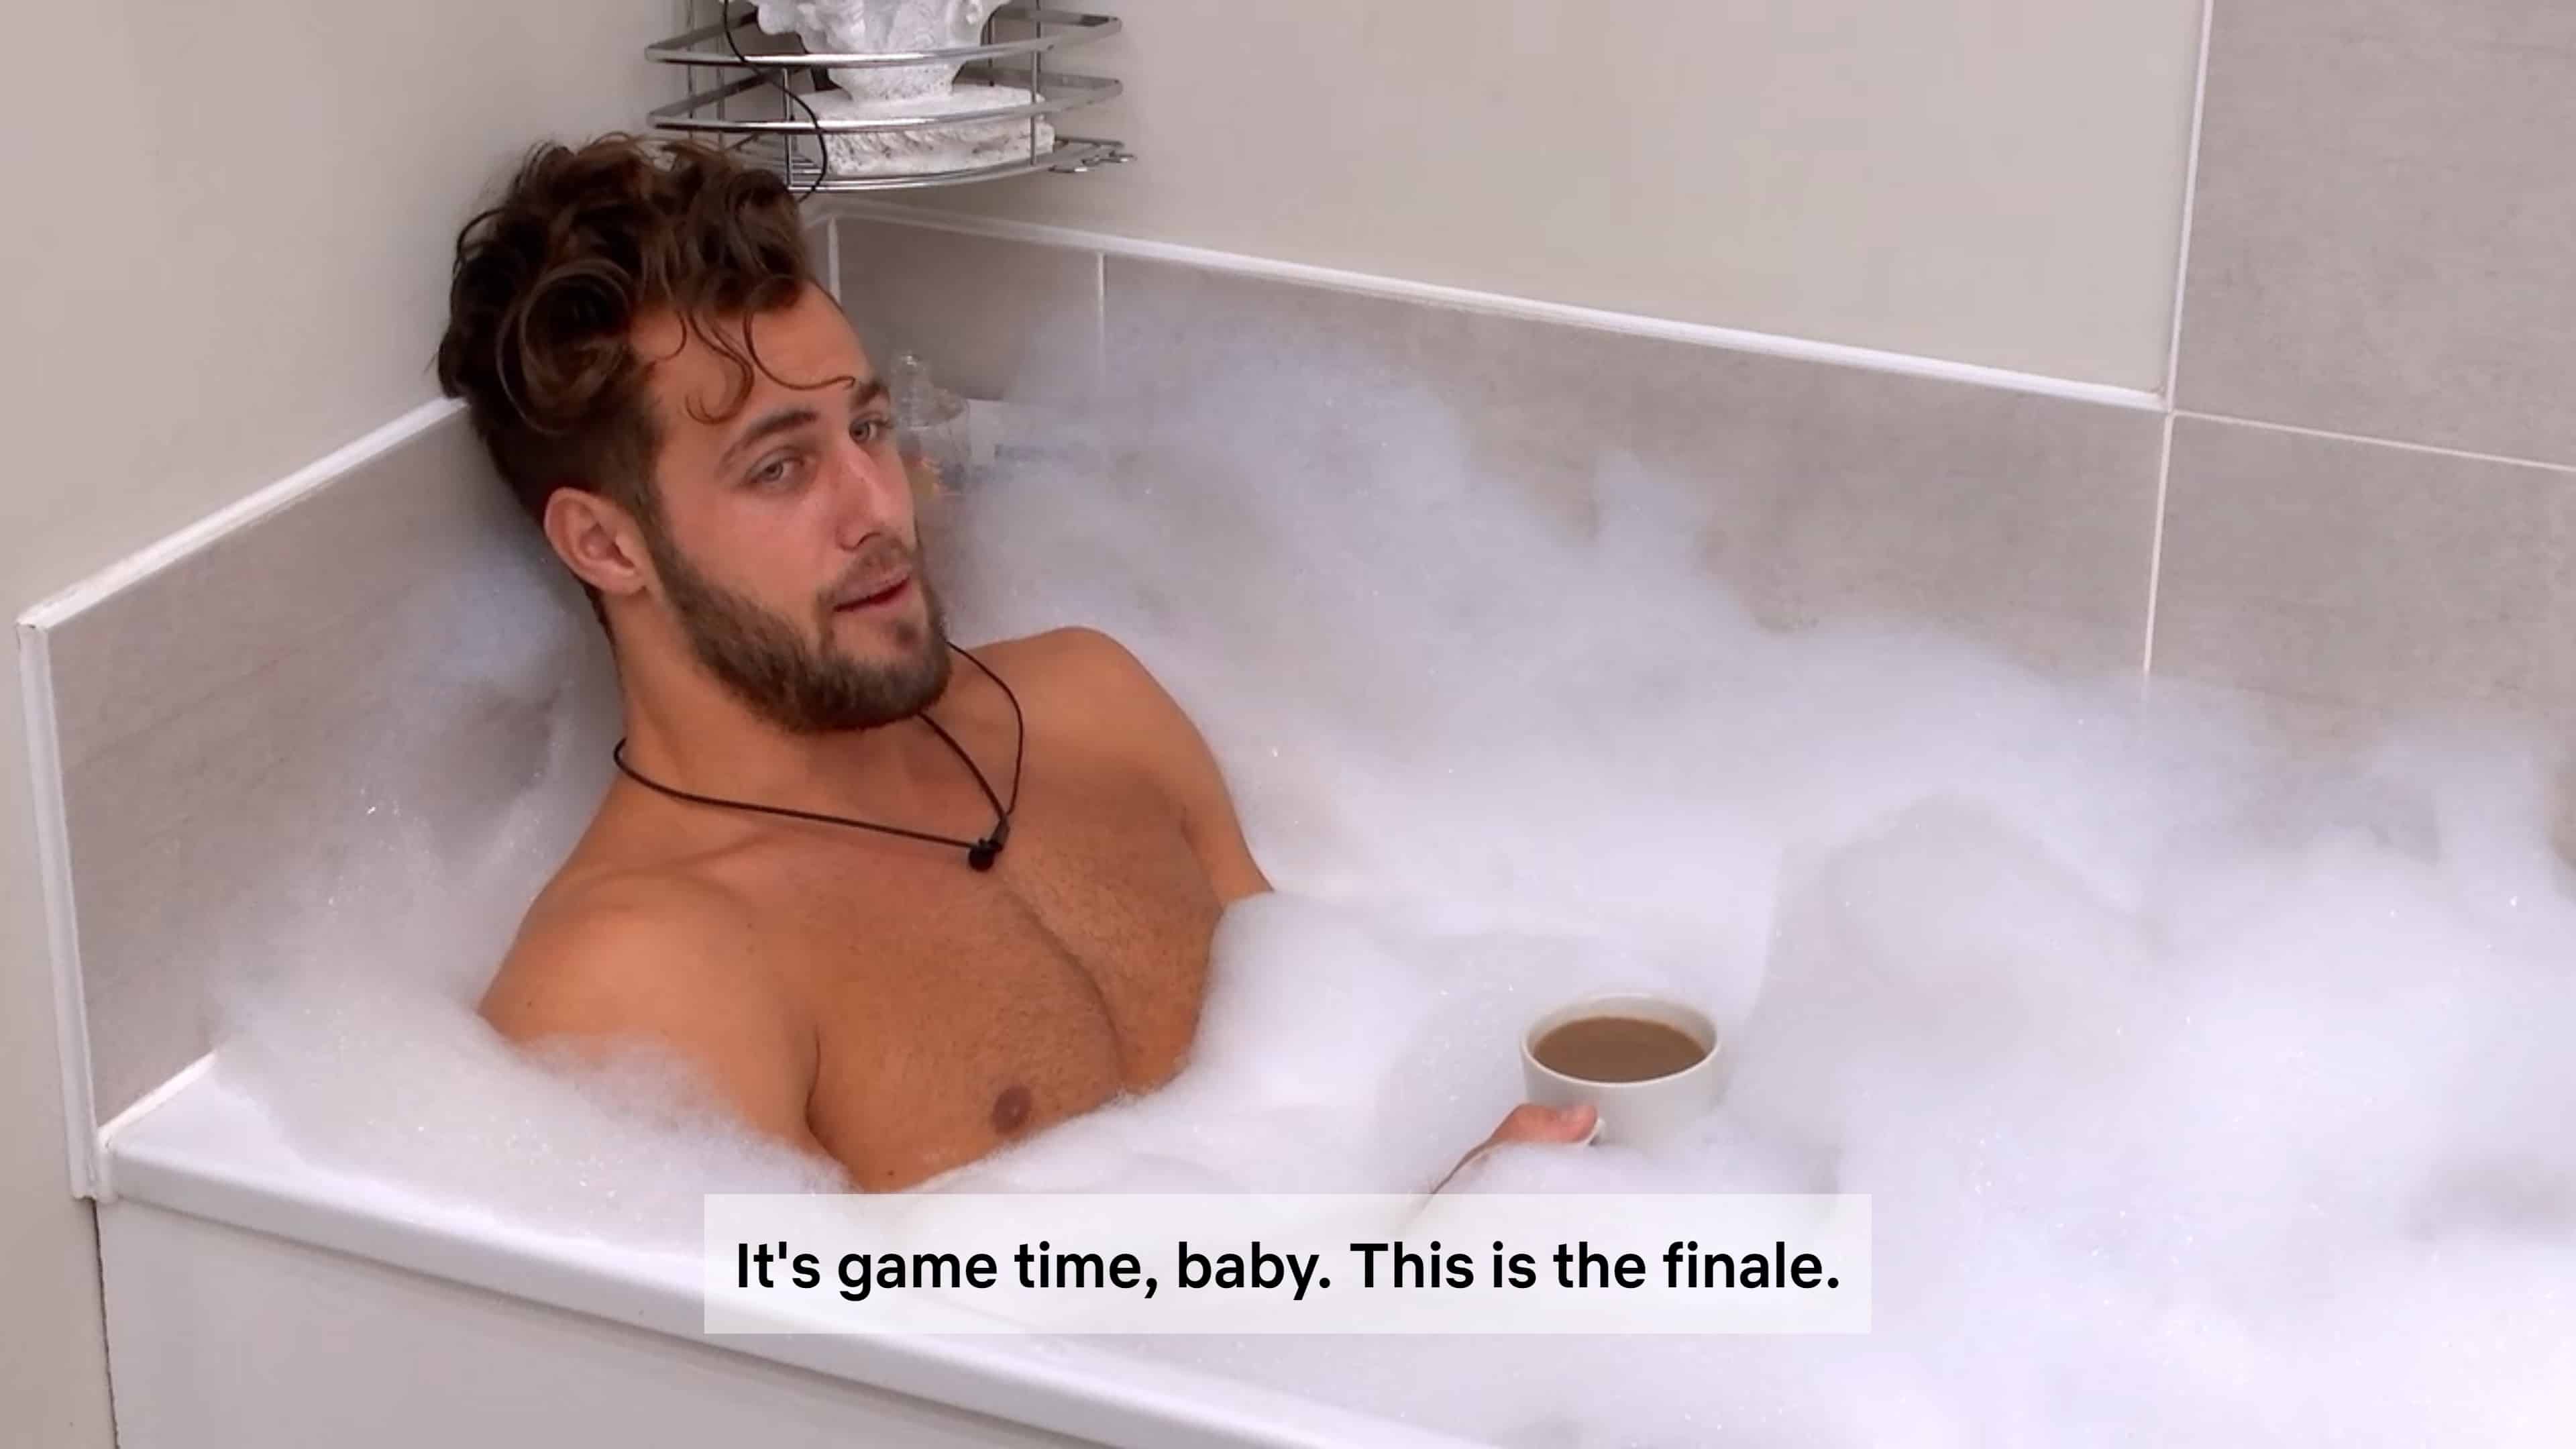 Mitchell, i nthe tub, trying to make a last minute pitch to River and Courtney